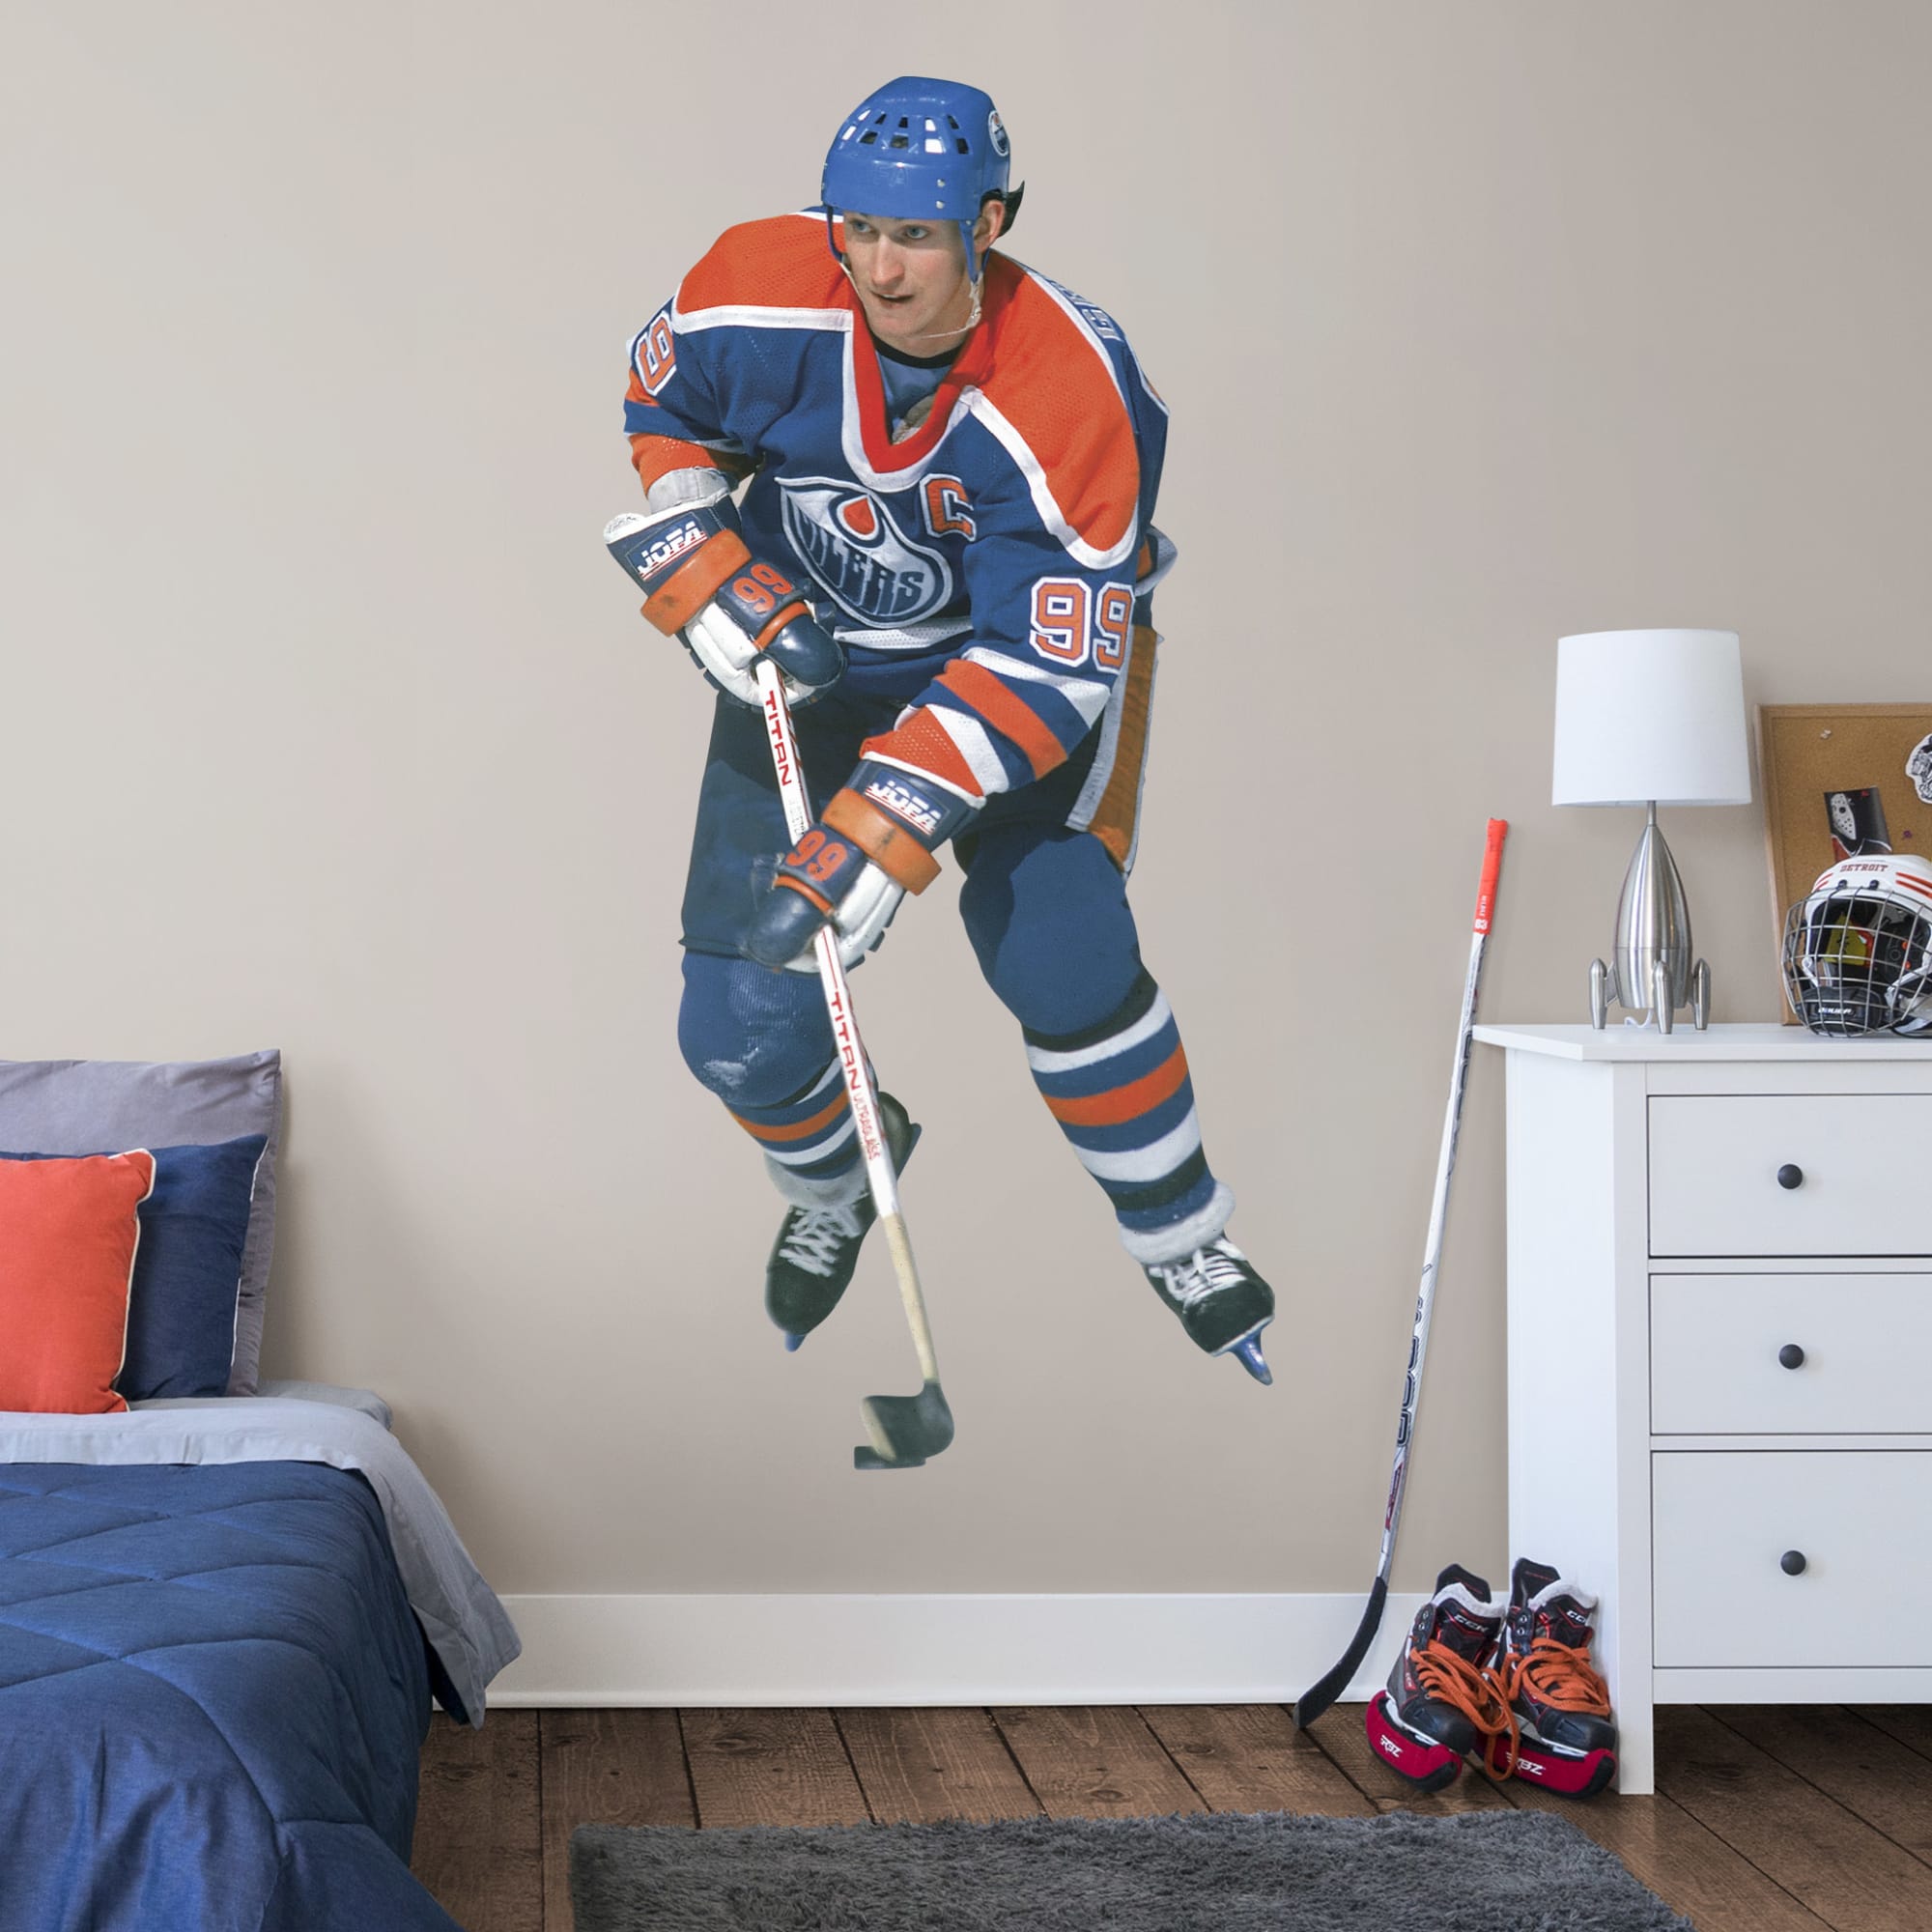 Wayne Gretzky for Edmonton Oilers - Officially Licensed NHL Removable Wall Decal Life-Size Athlete + 2 Decals (36"W x 75"H) by F